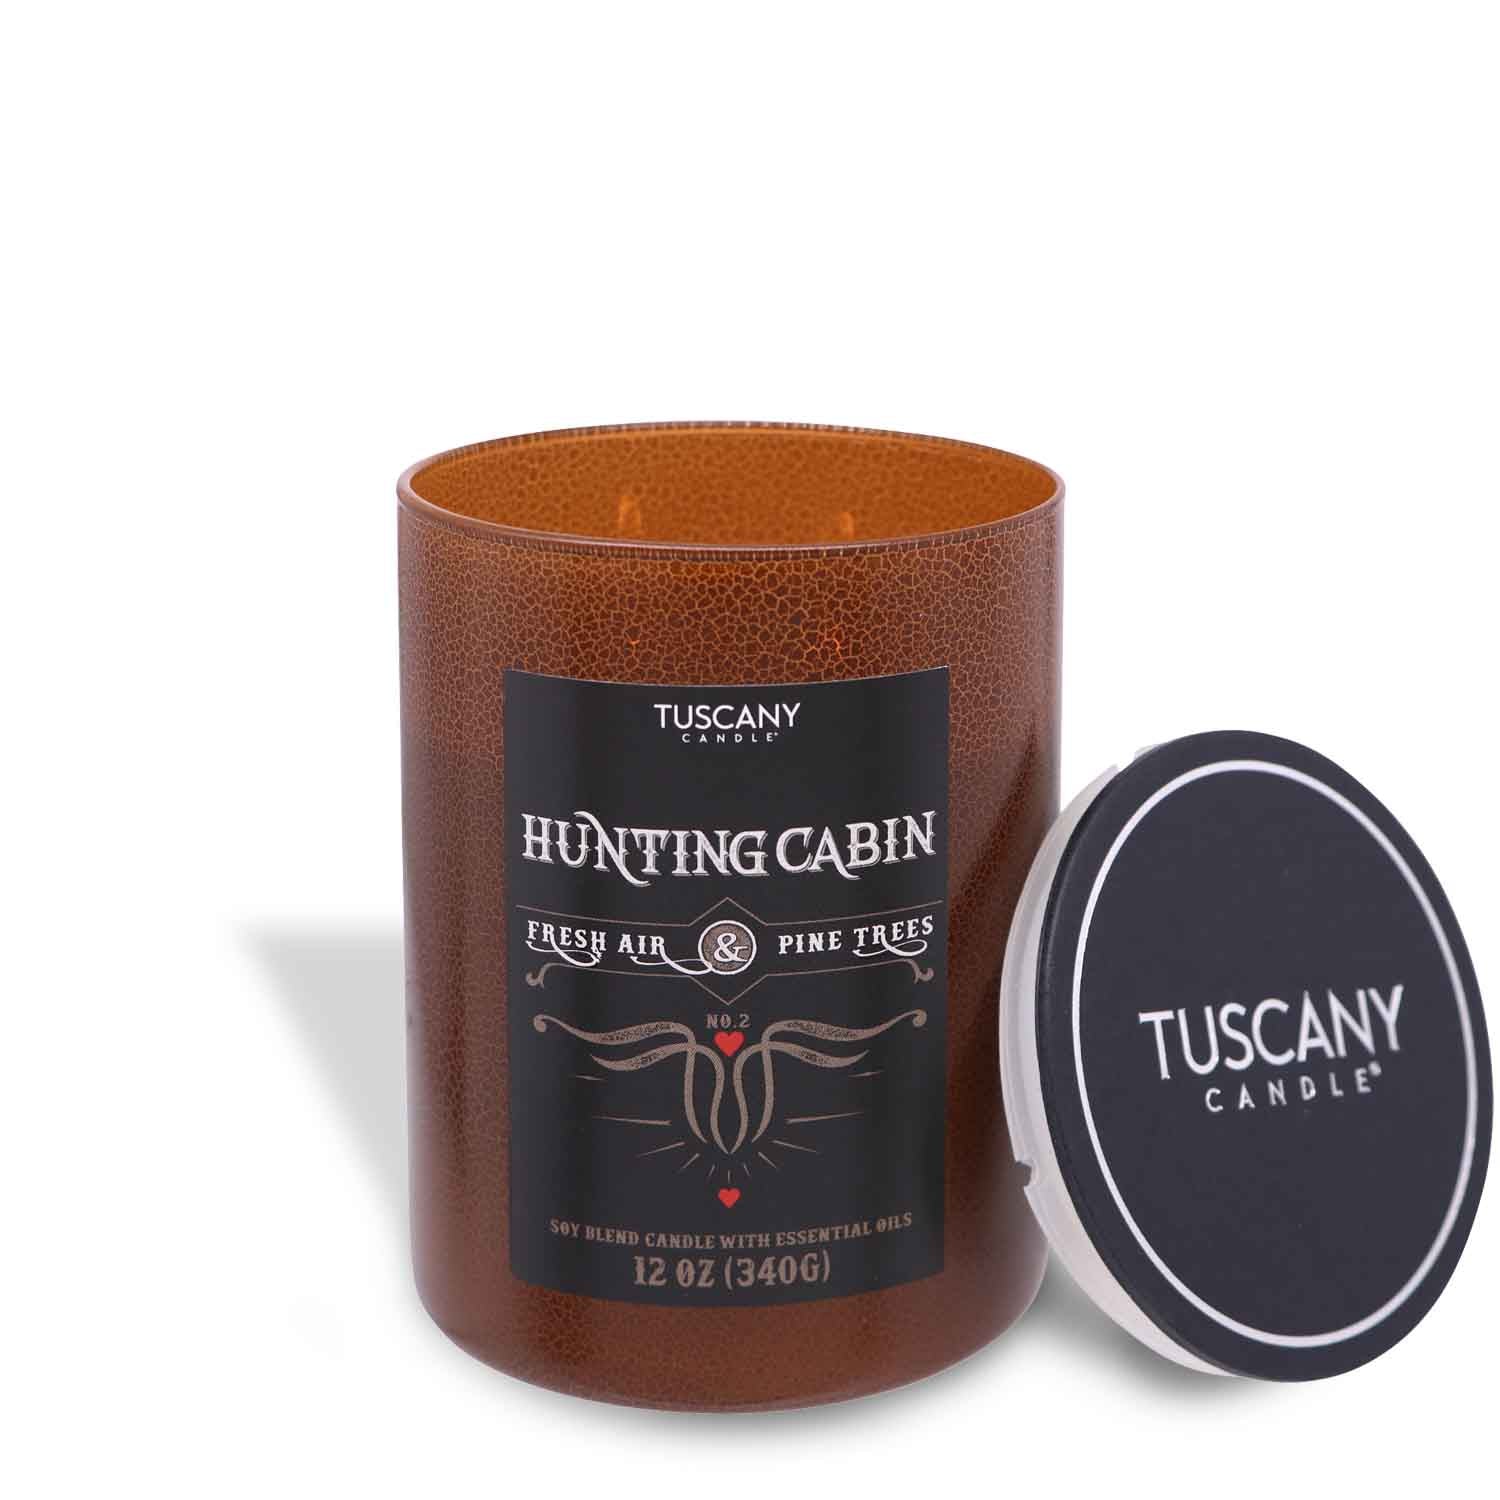 A Tuscany Candle® SEASONAL Hunting Cabin Scented Jar Candle (12 oz) – Rugged Retreat Collection with a lid next to it, emitting the fresh aroma of juniper berry and pine woods.